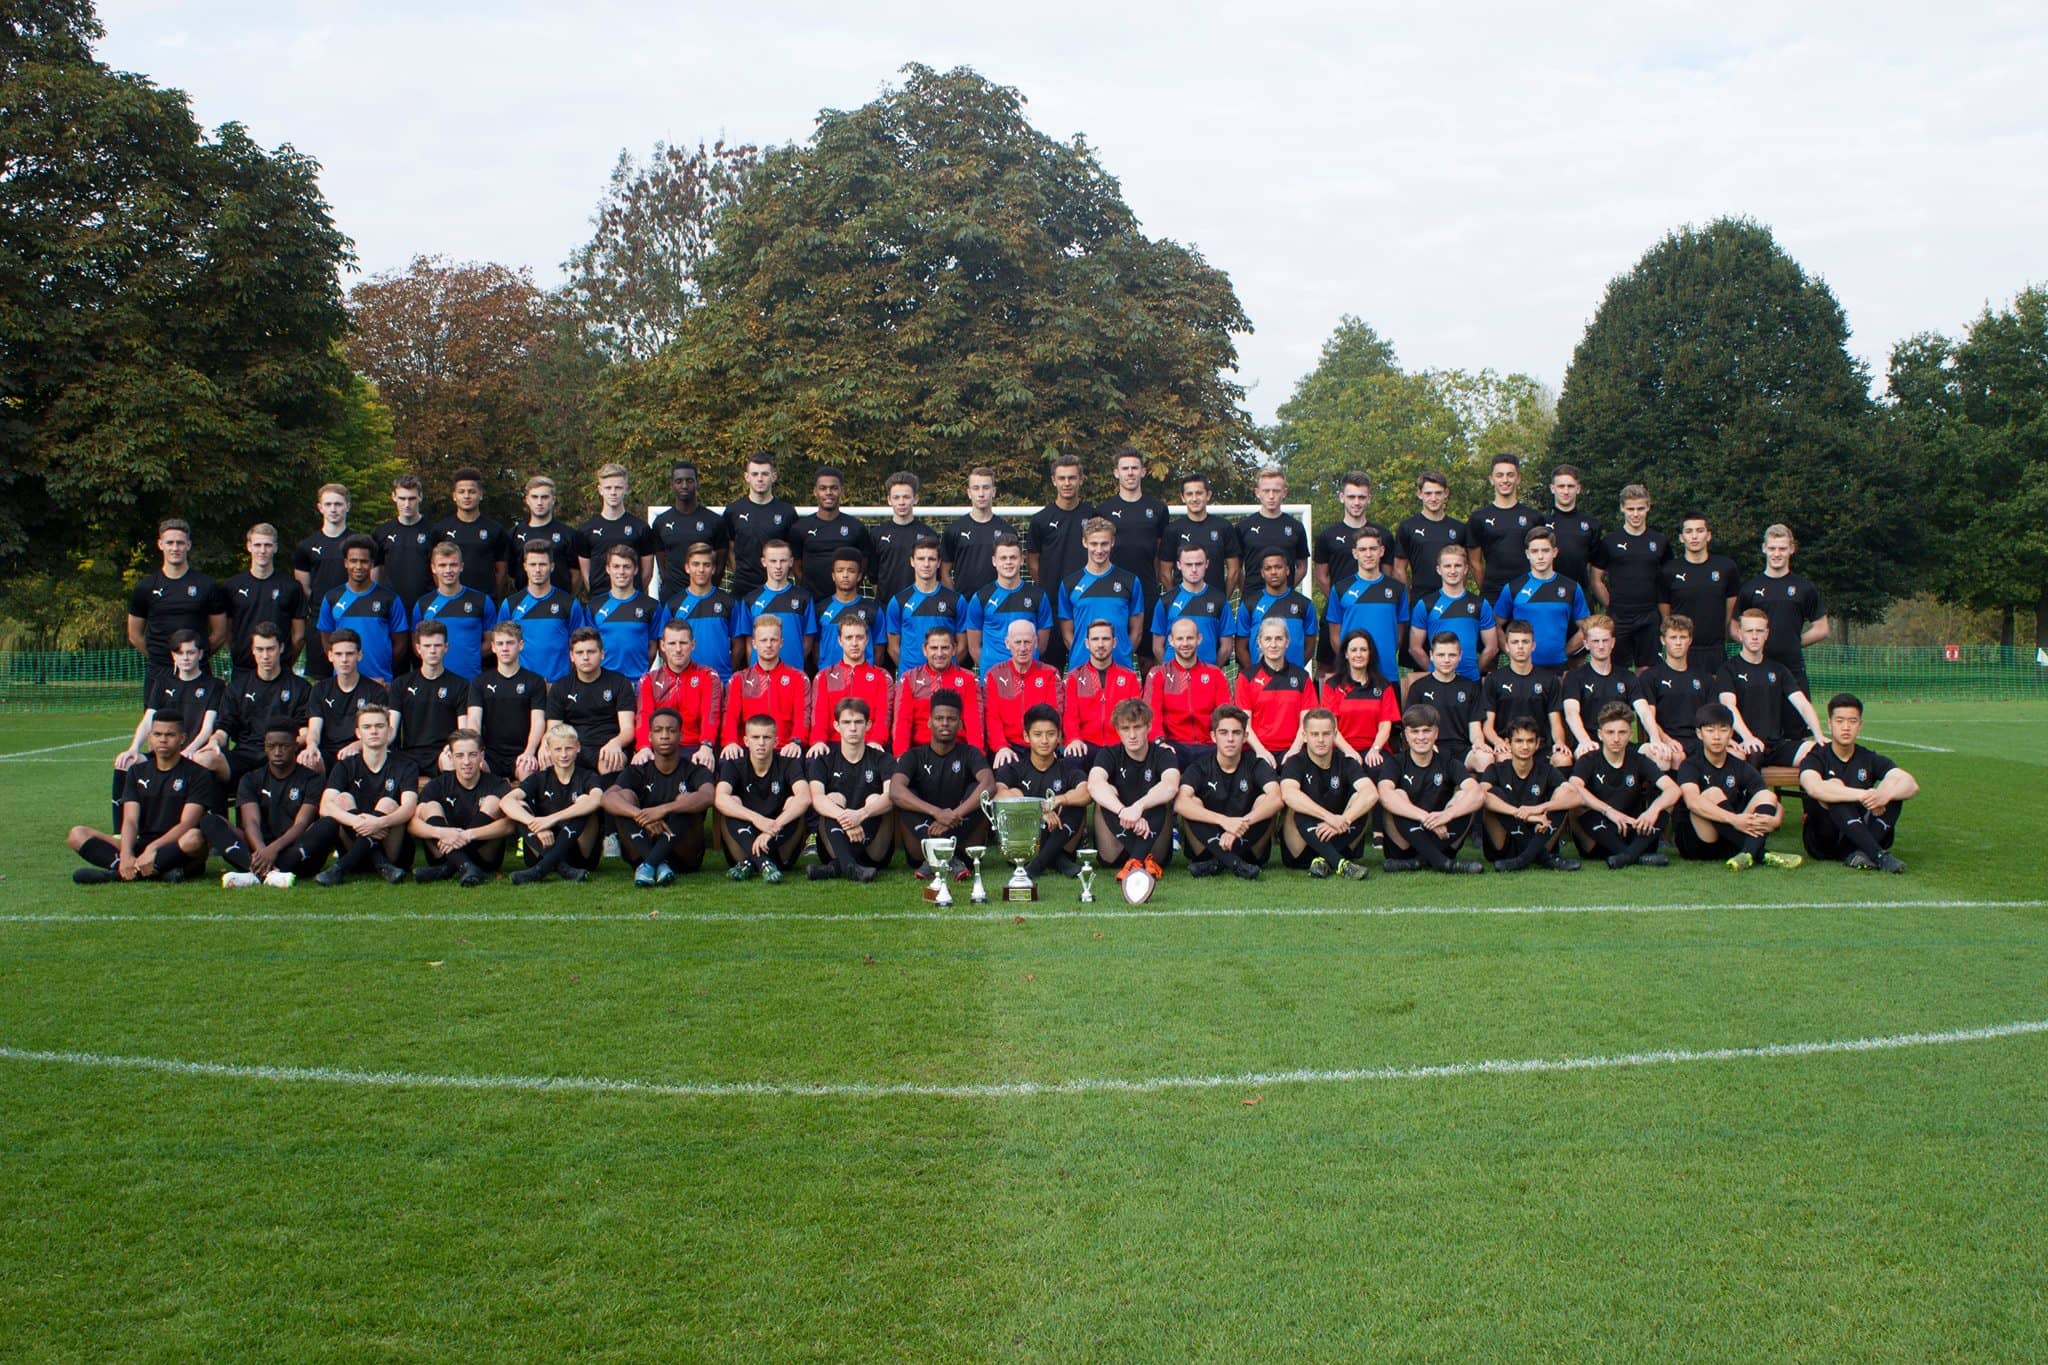 Students and coaching team of the FAB football academy in London, England 